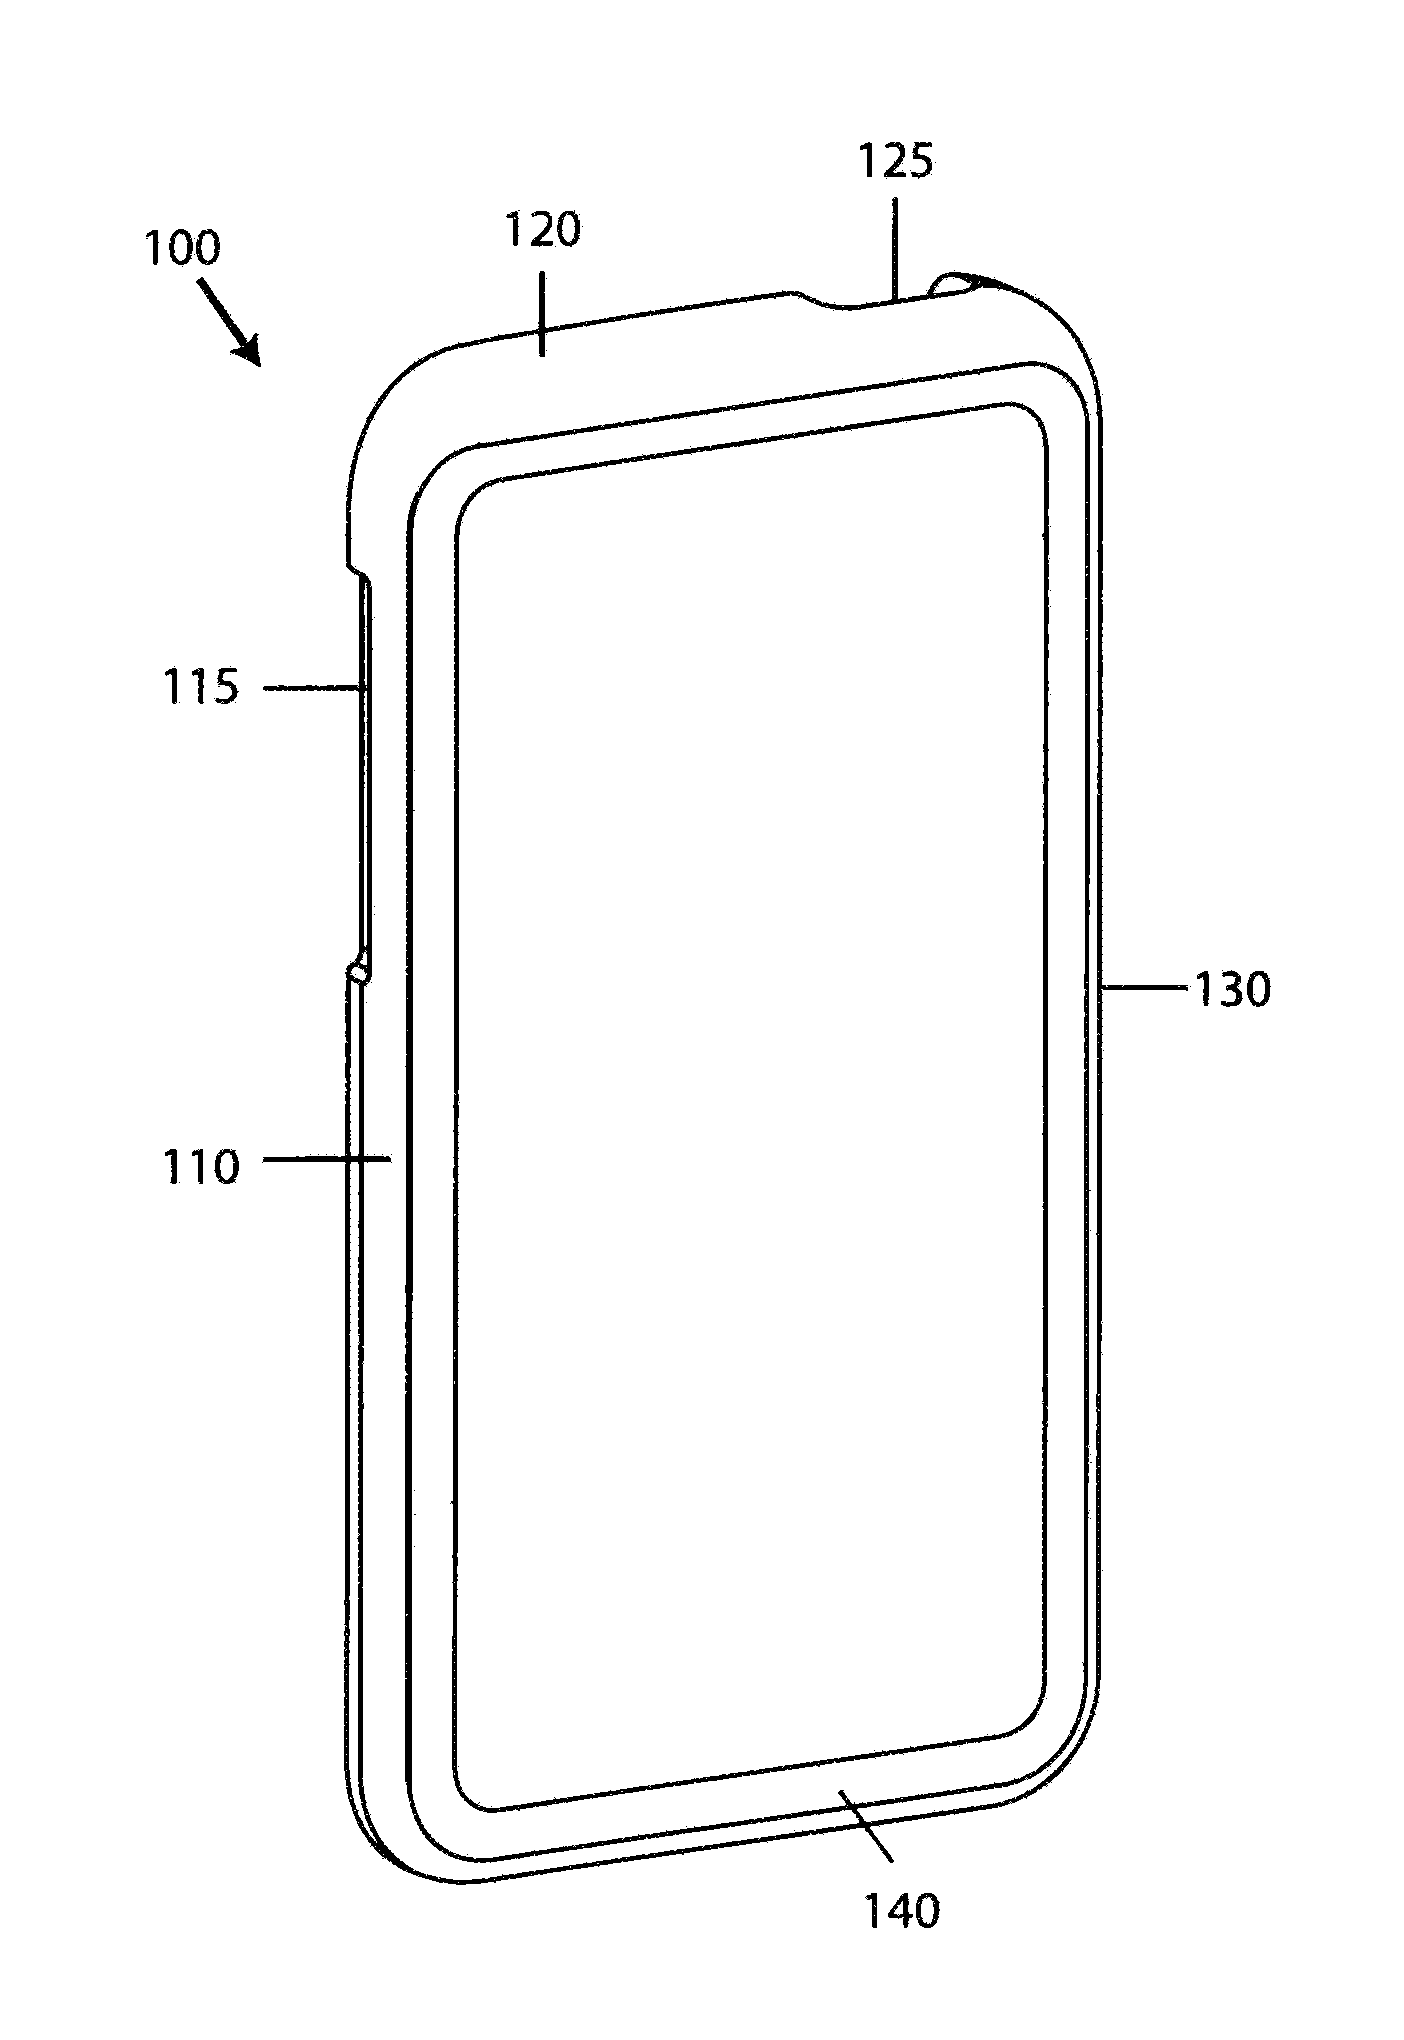 Cases and covers for handheld electronic devices